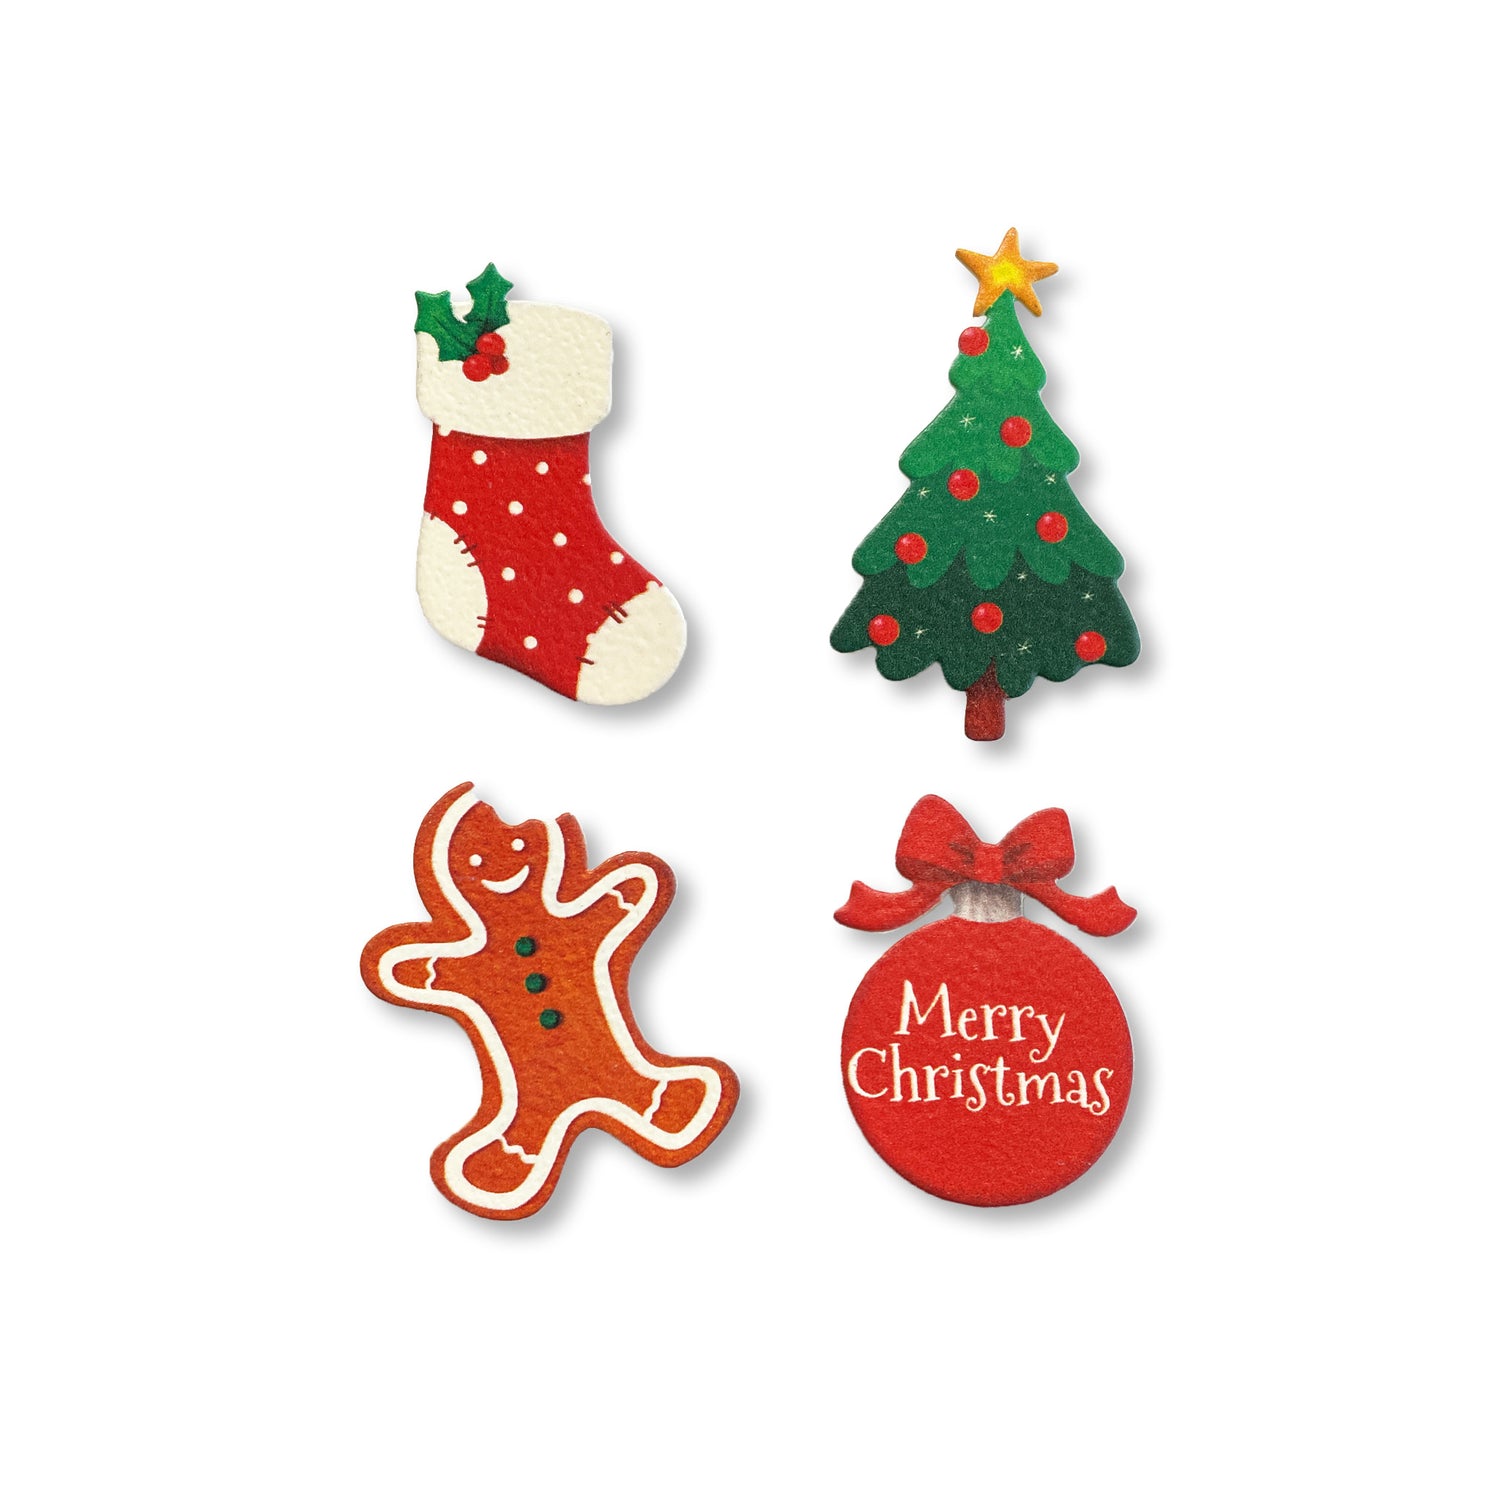 Christmas Crab Magnets or Pin Back Buttons - Merry Crabmas 1 inch Magnets